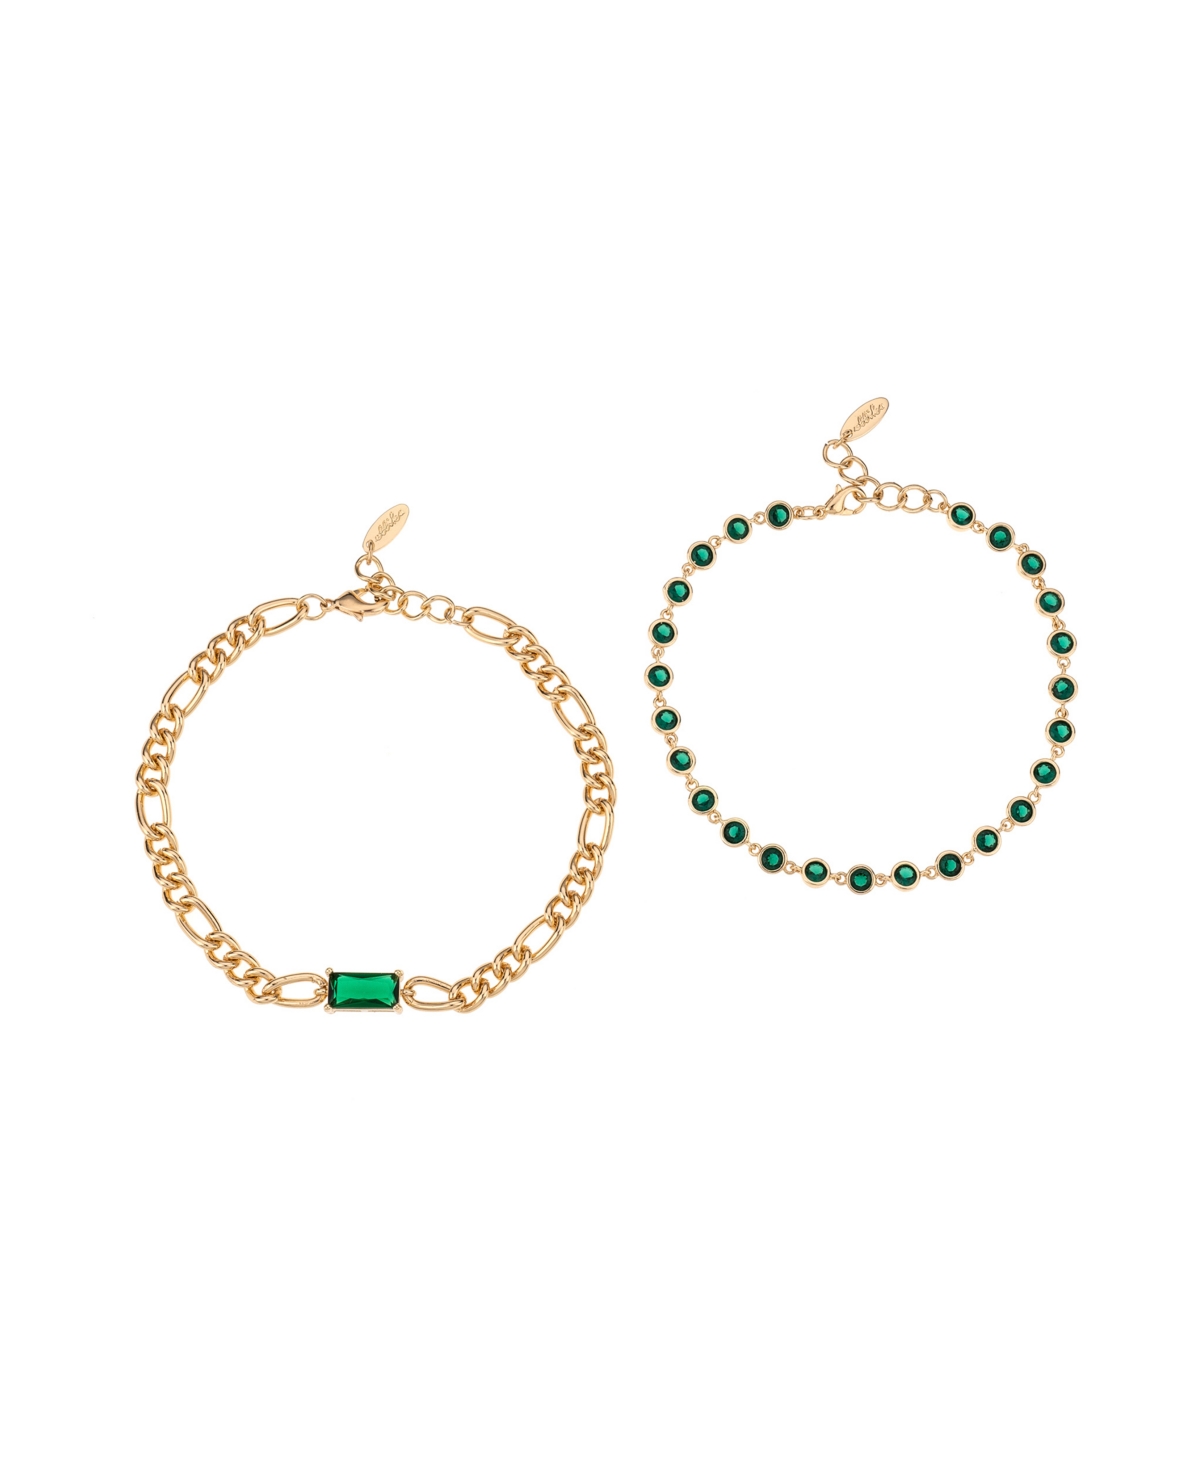 ETTIKA BEJEWELED EMERALD 18K GOLD PLATED ANKLET SET, 2 PIECES